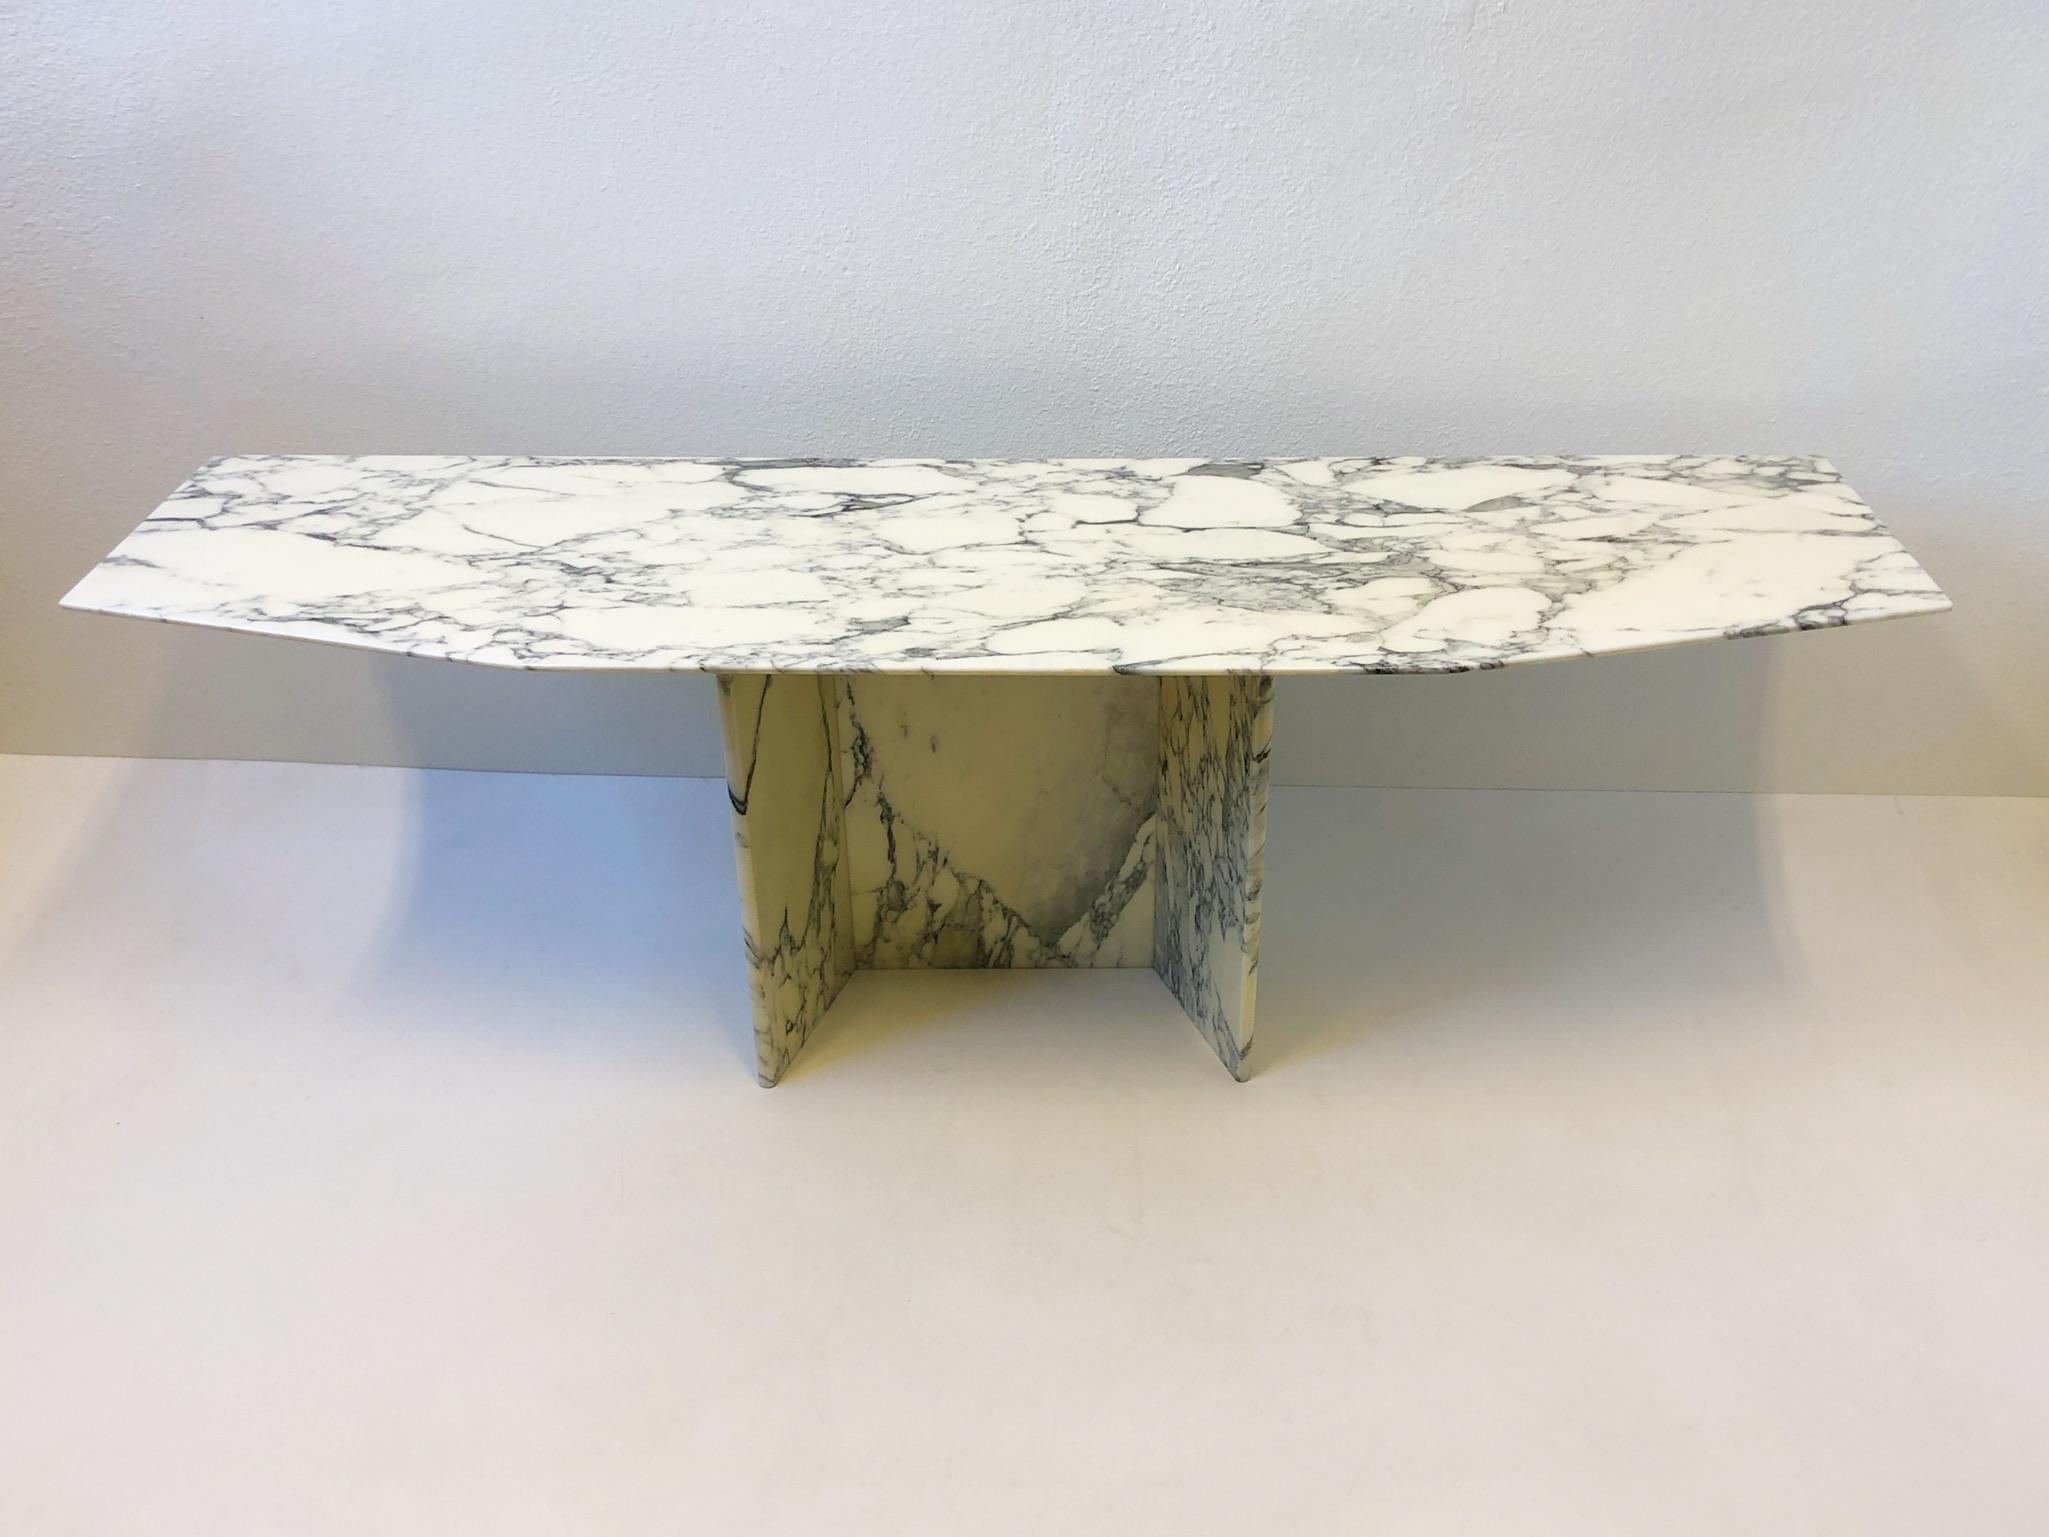 A spectacular 1970s Italian polish Carrara marble Console table. 
The top is flat on the back, a nife edge on the front and sides. 
The base has a silver powder coated steel top that support the marble top. 

Measurements 71” wide 19.75” deep